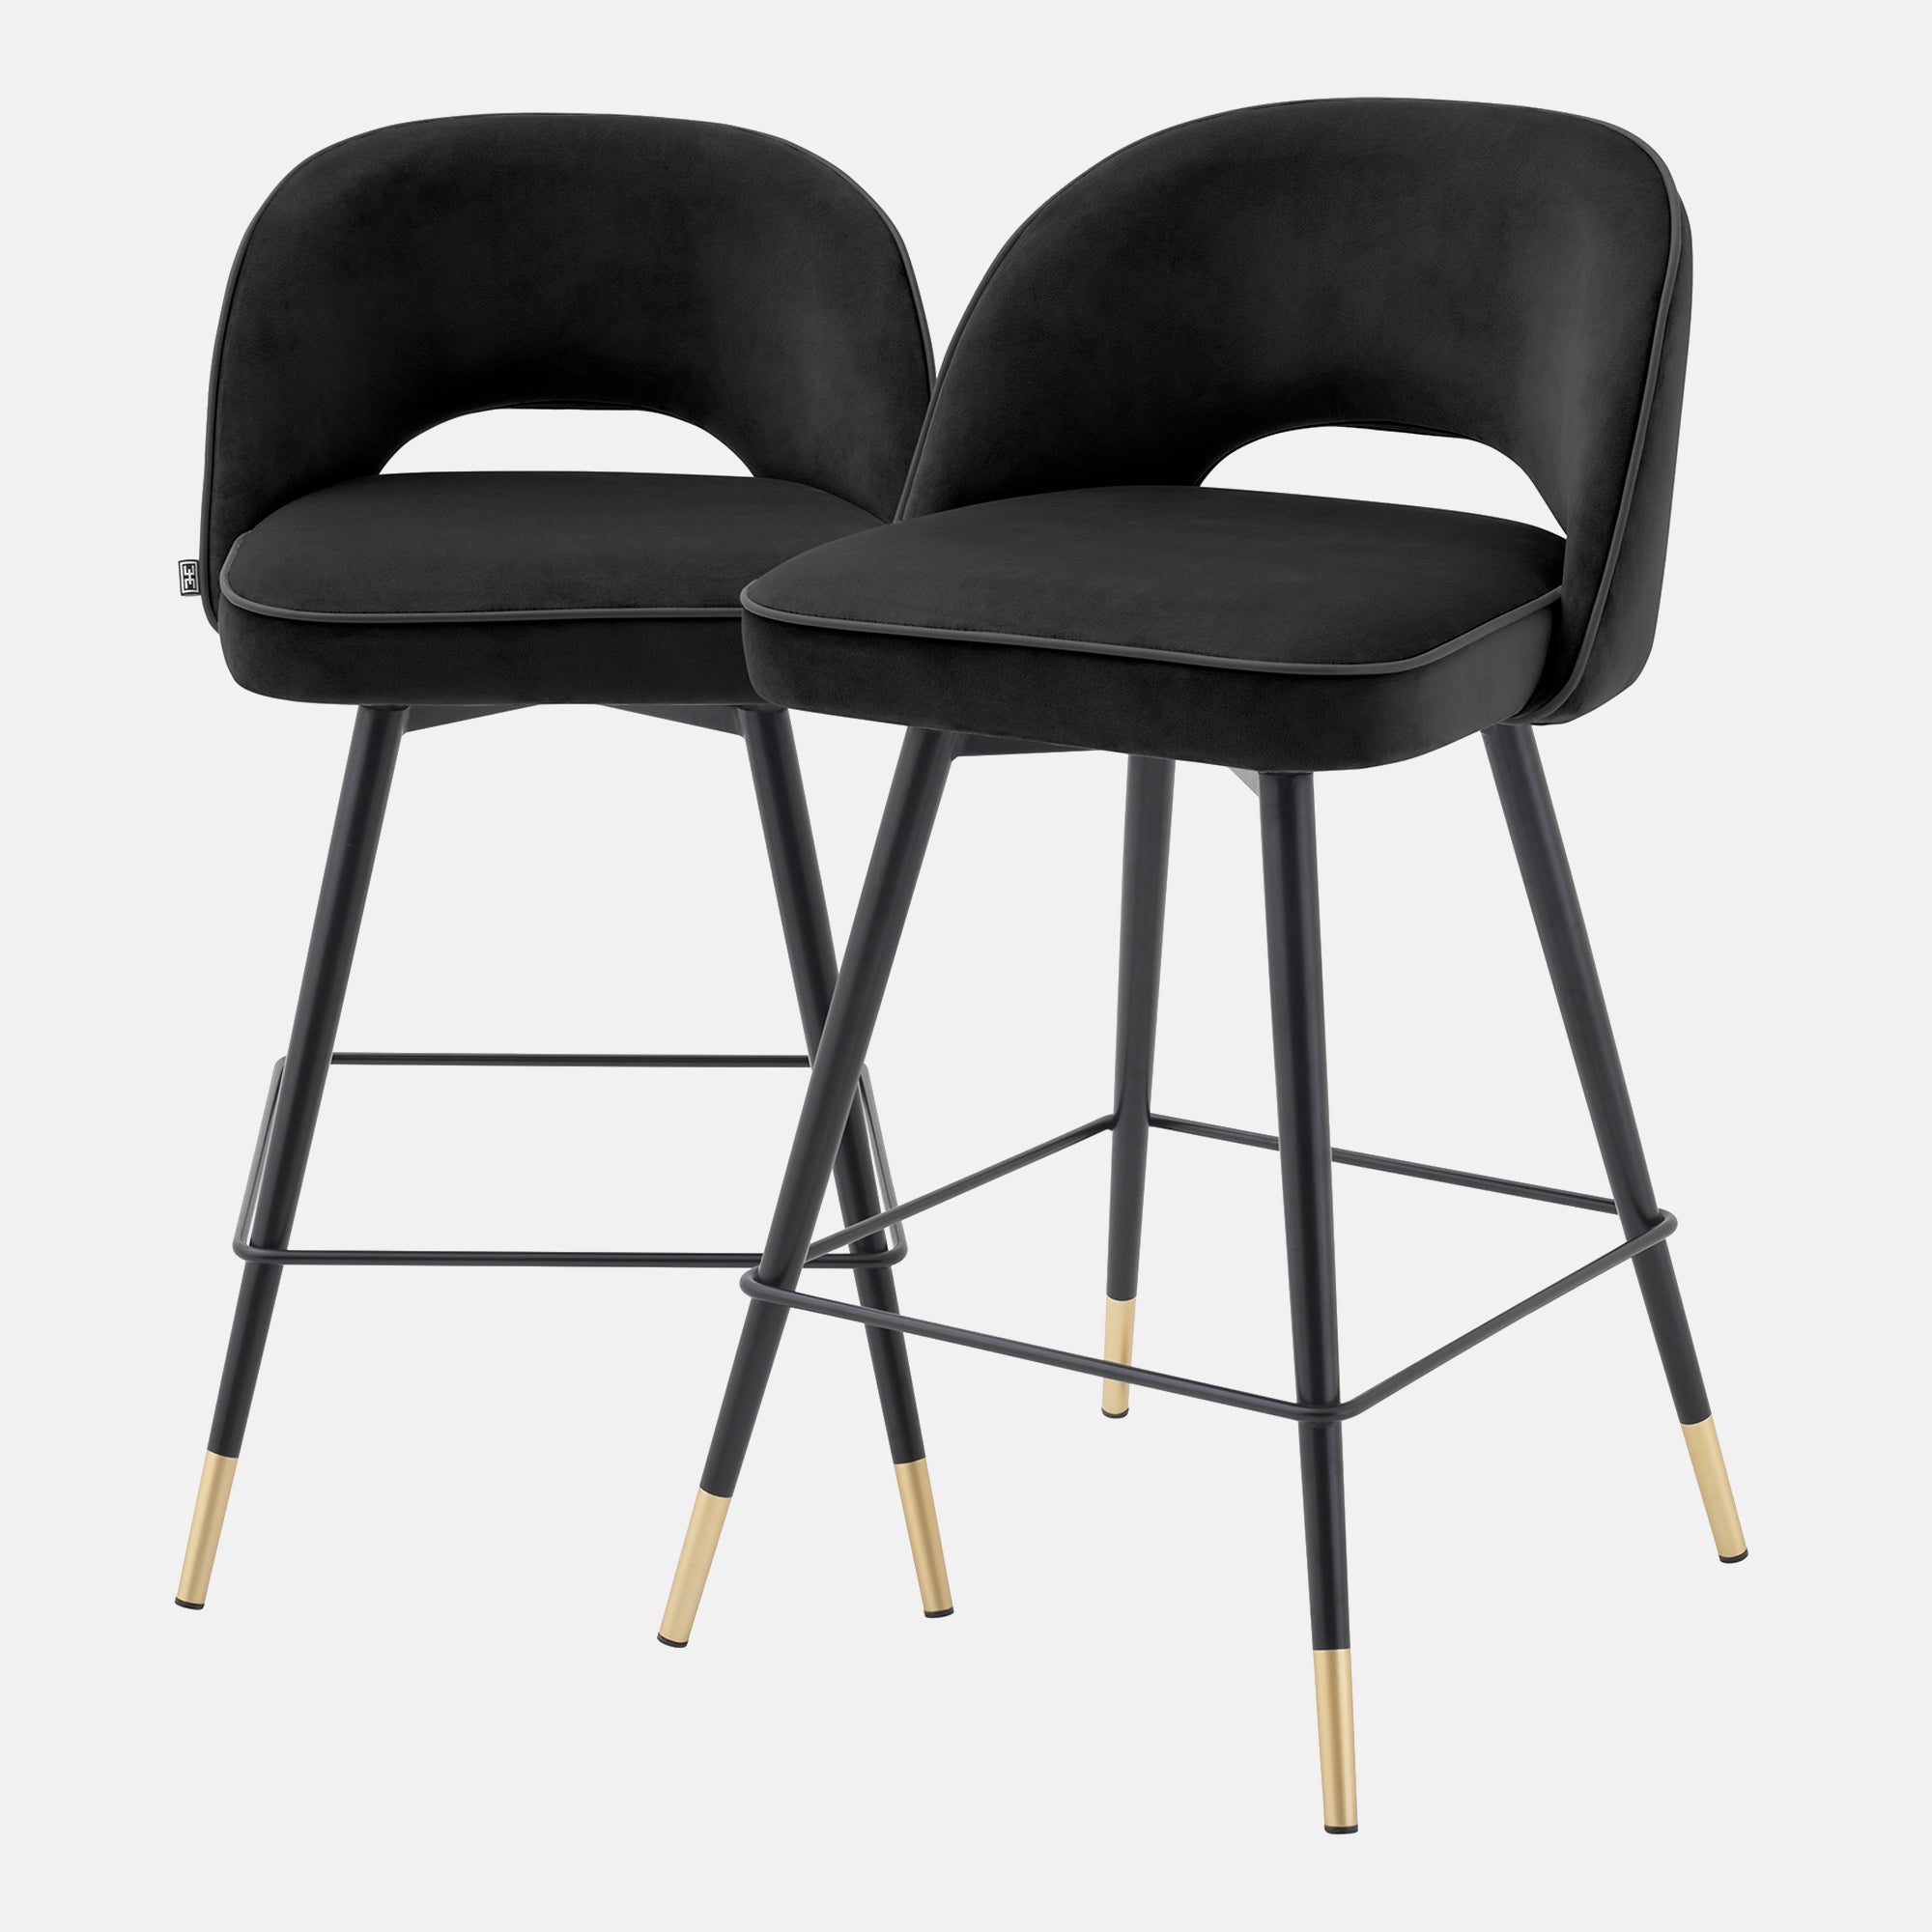 Eichholtz Cliff - Set Of 2 Counter Stools In Roche Black Velvet/Black Faux Leather Piping